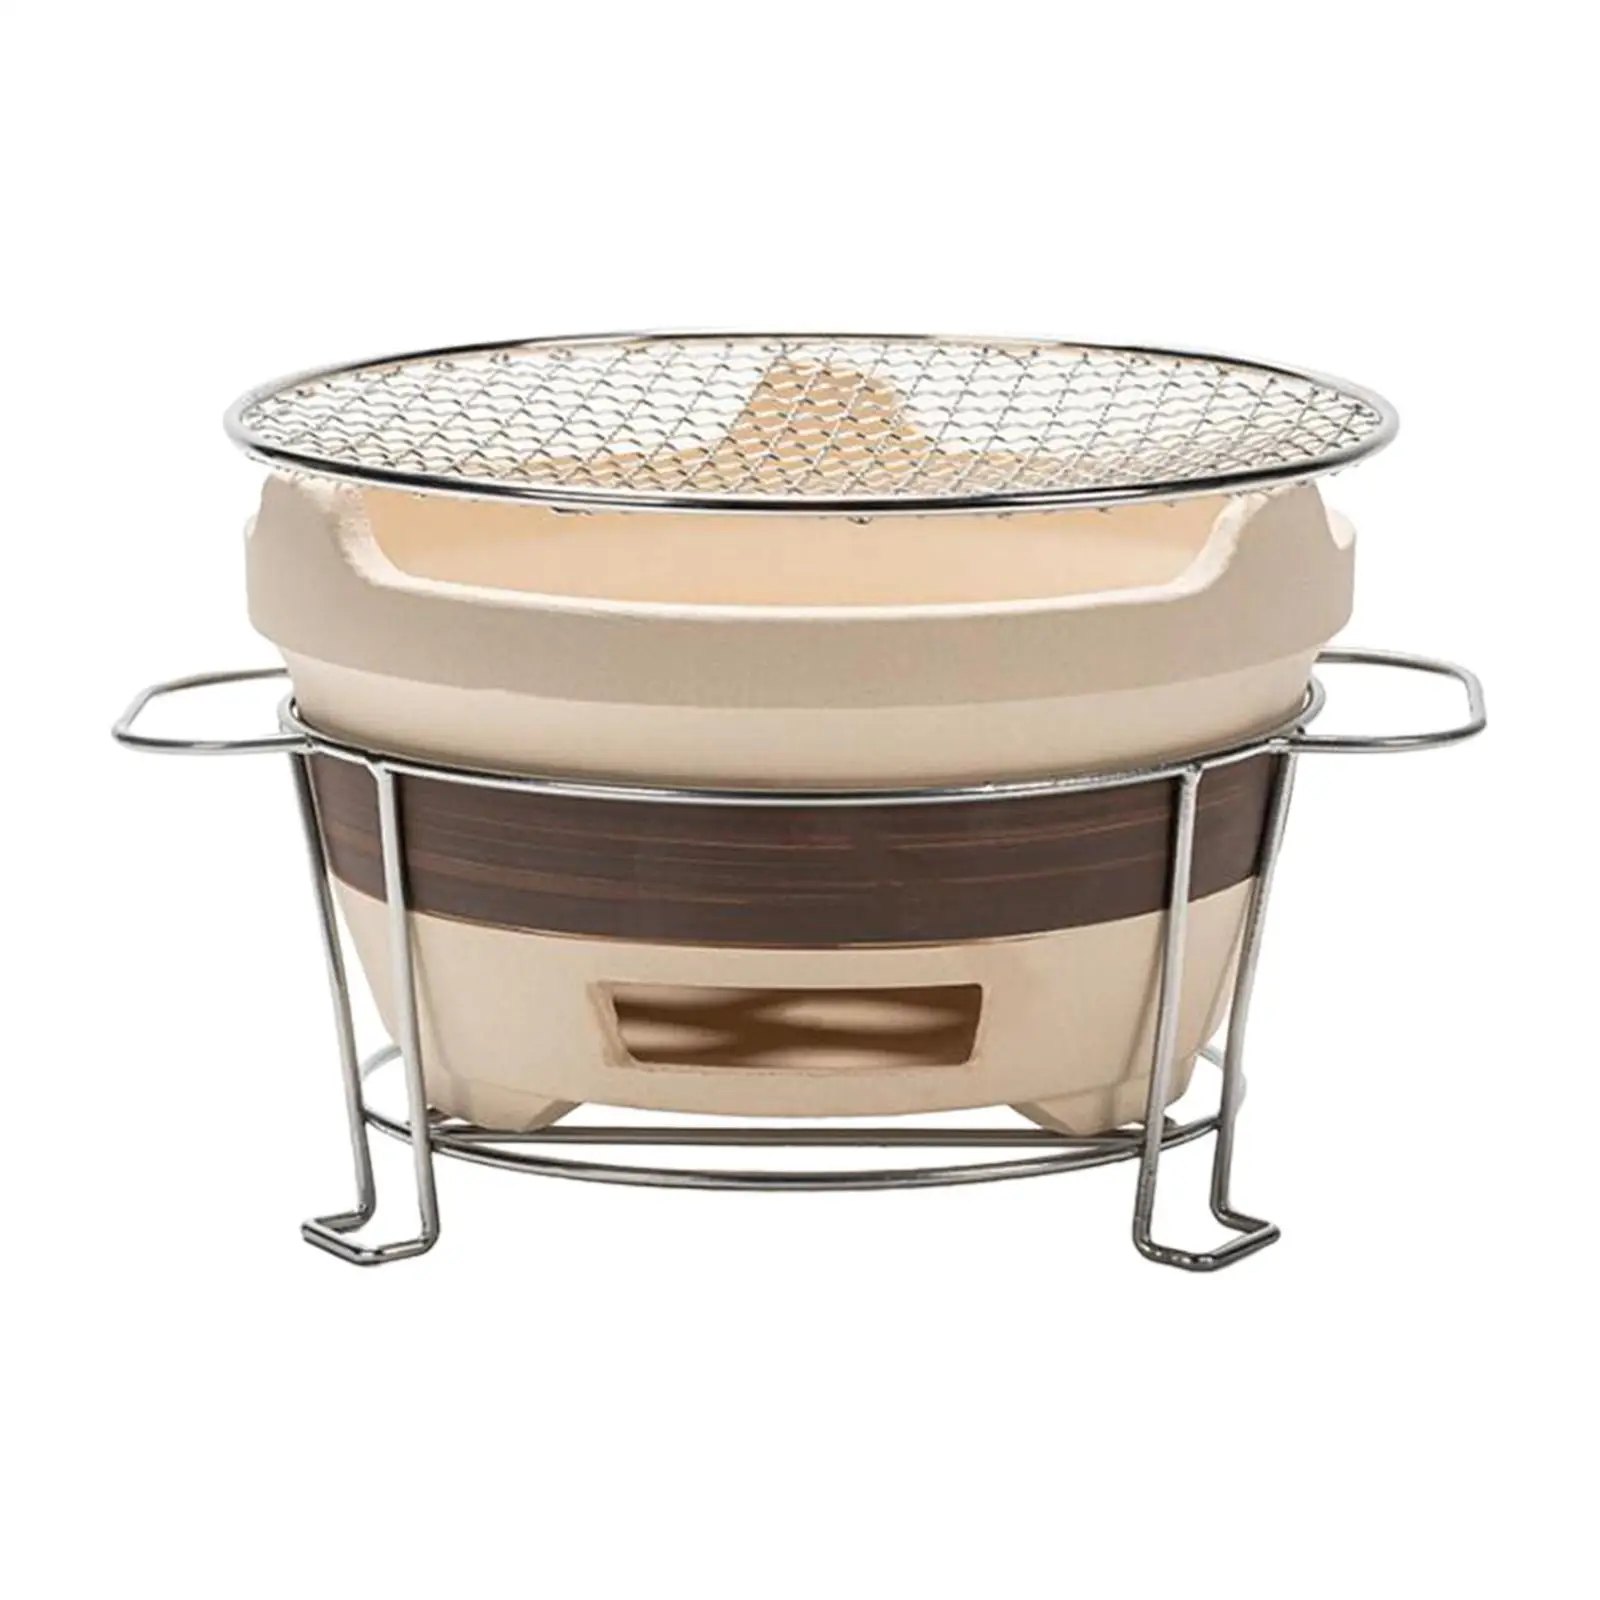 Small Charcoal Grill with Wire Mesh Multifunctional Japanese Grill Barbecue Stove for Outdoor Patio Hiking Backyard Camping